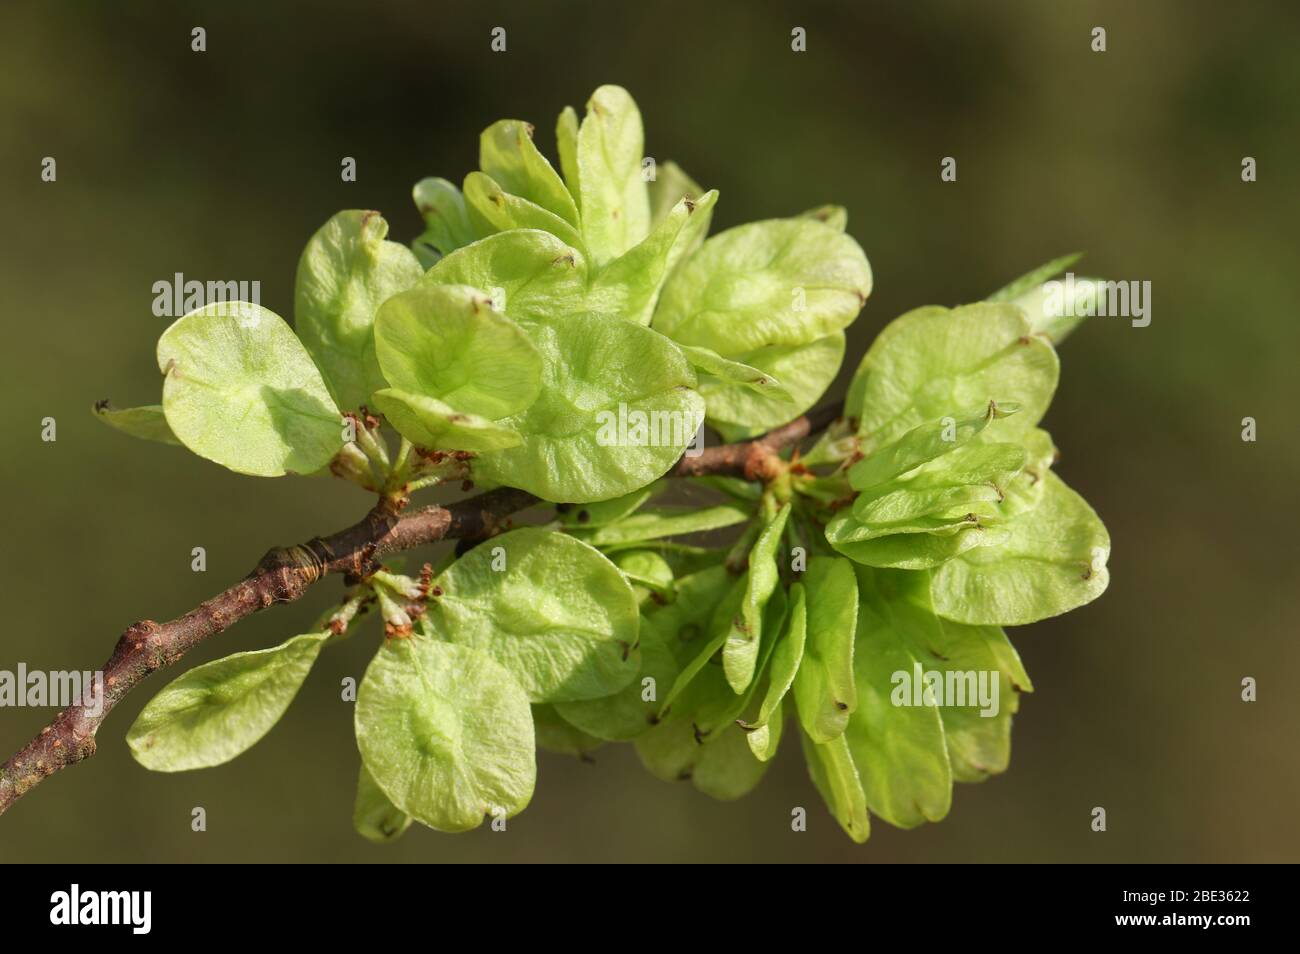 A branch of the fruits of an English Elm Tree, Ulmus procera, growing in woodland in the UK. Stock Photo